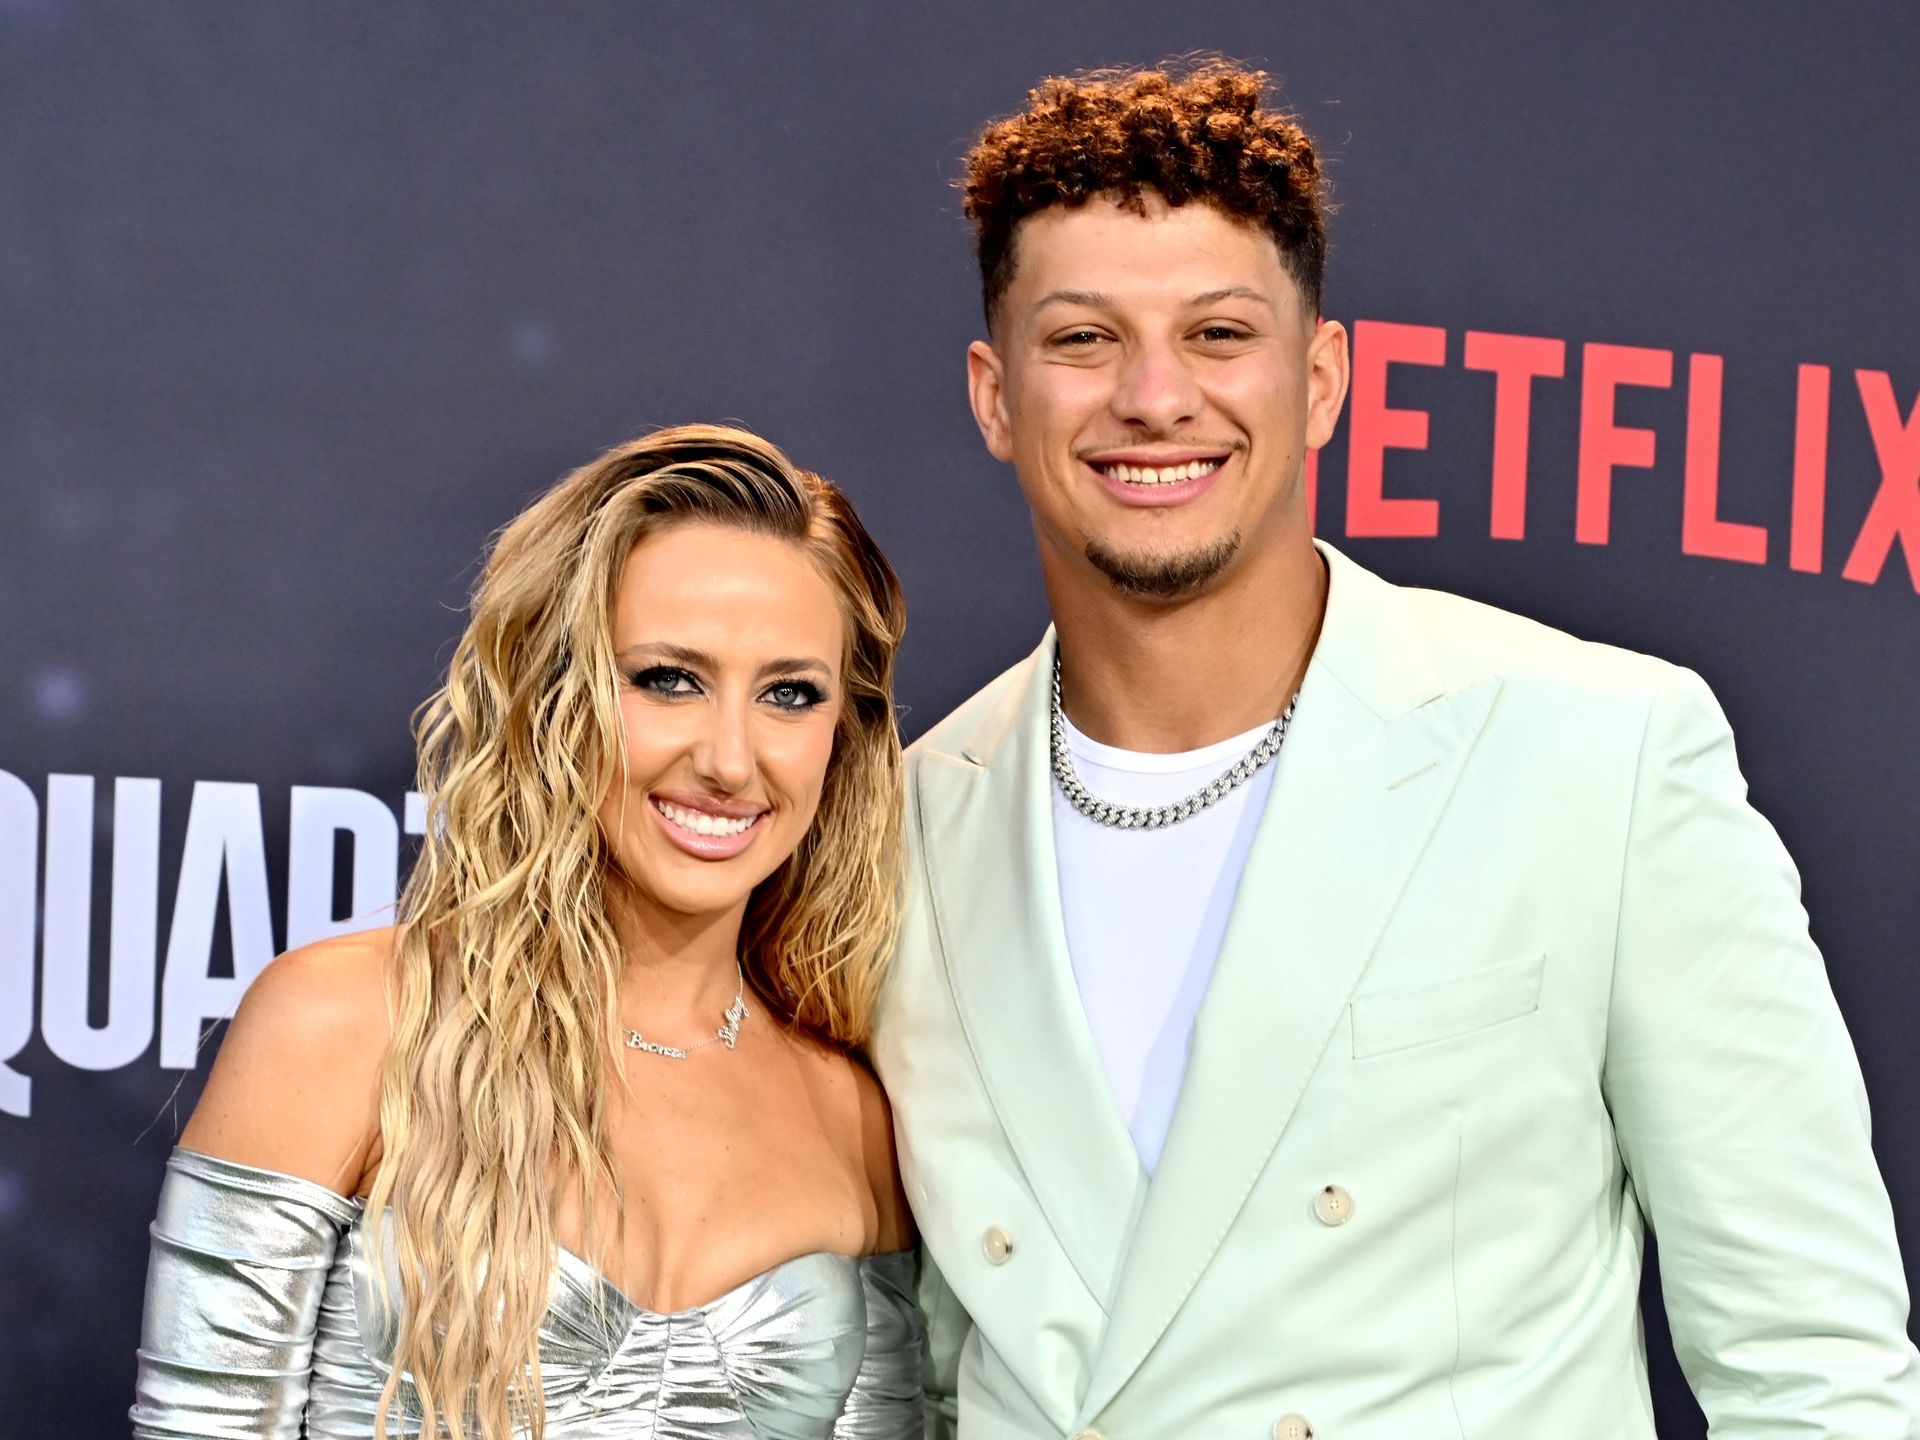 Who is Patrick Mahomes' wife Brittany?